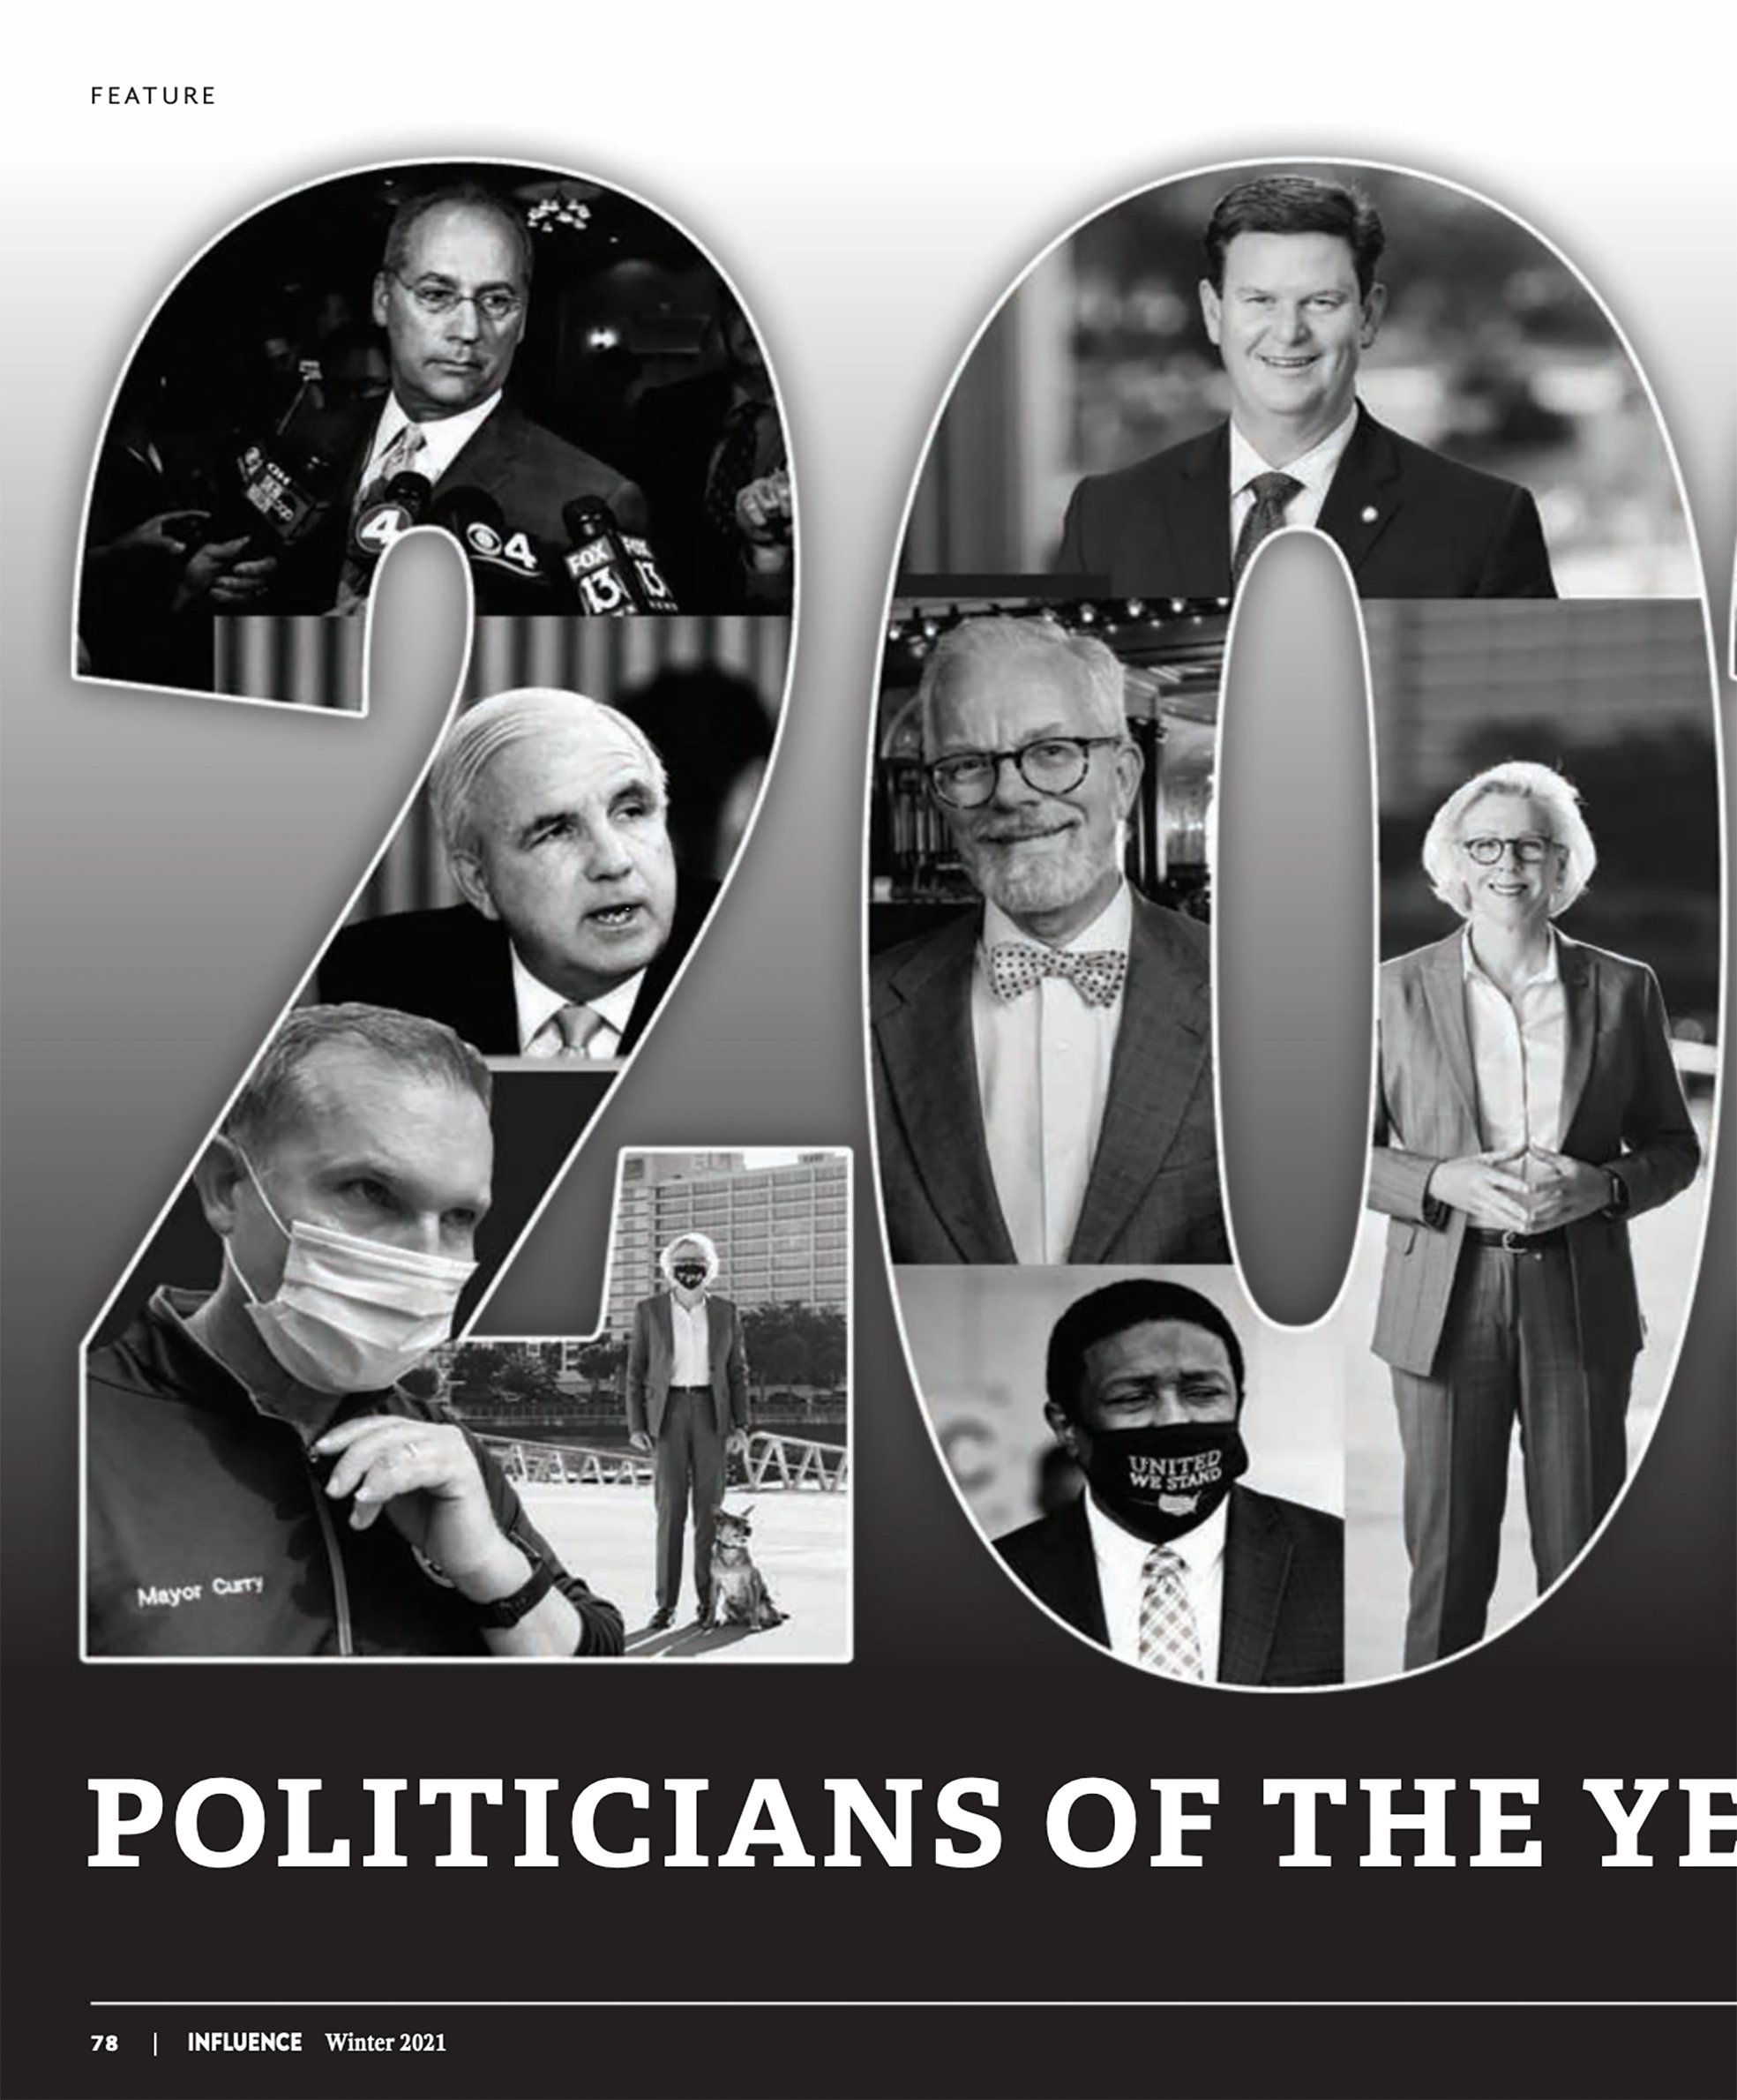 INFLUENCE Magazine Winter 2021 2020 Politician(s) of the Year by Alex Workman